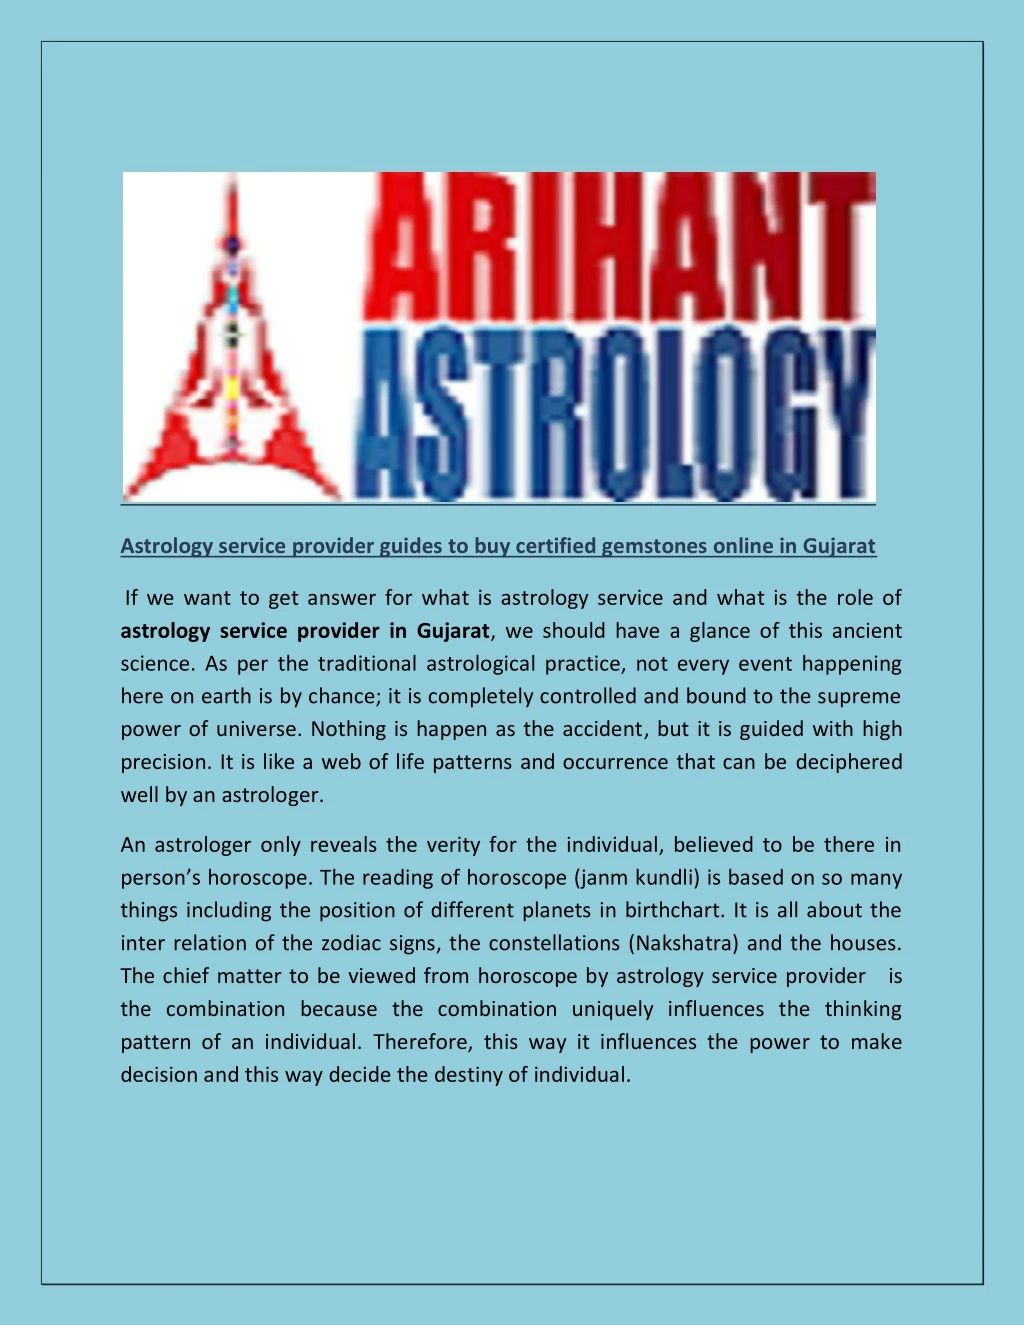 astrology service provider guides